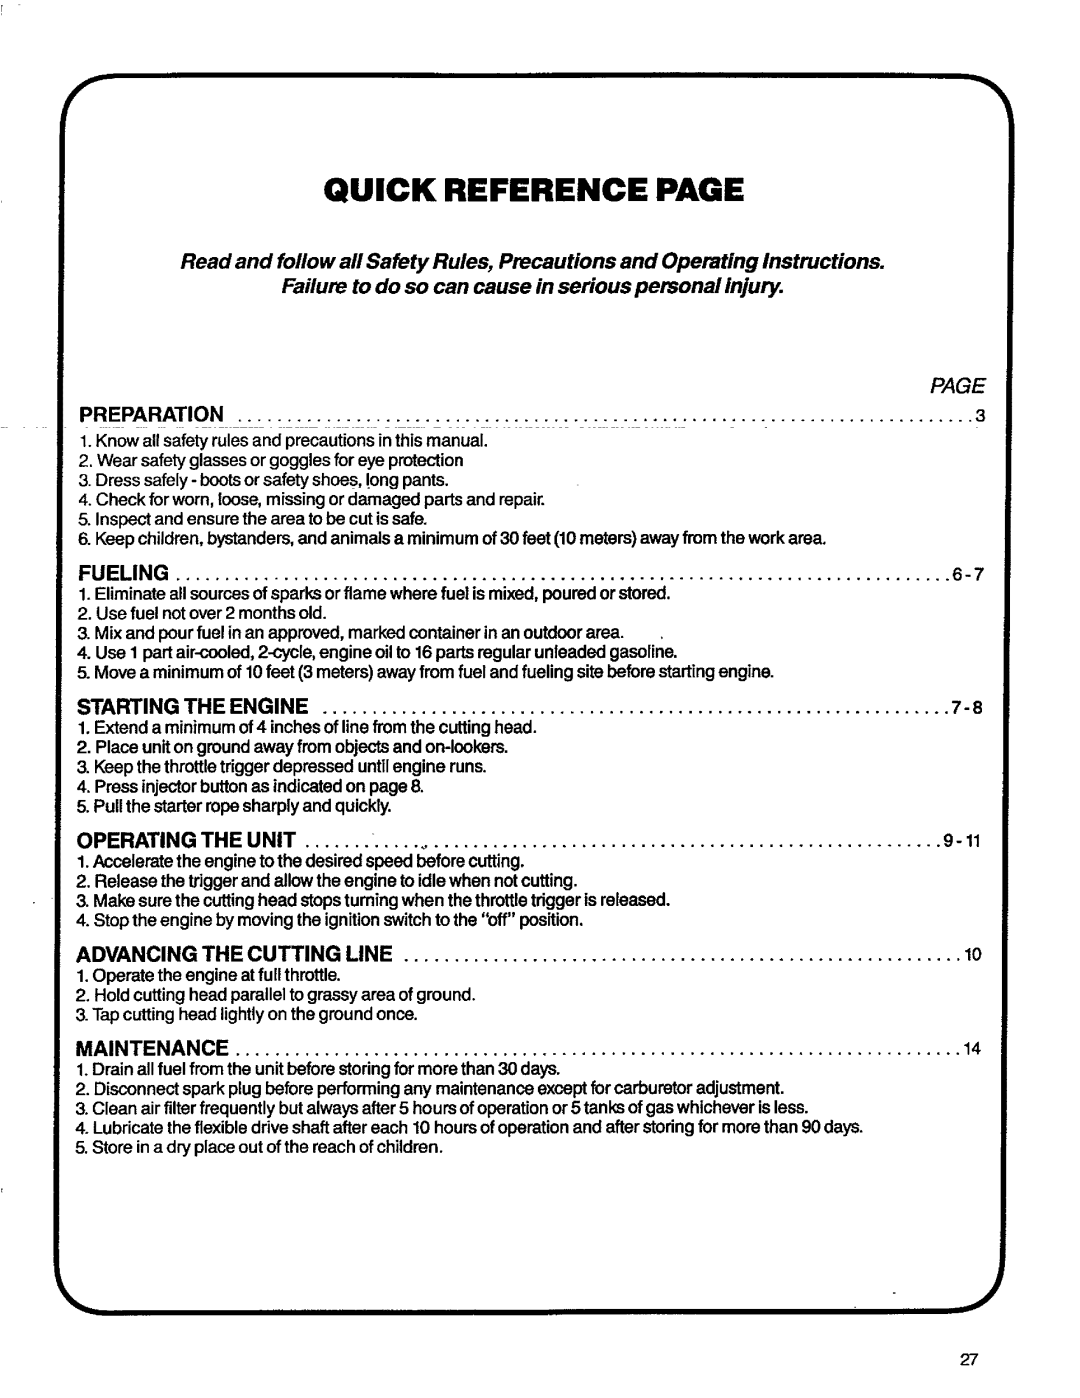 Craftsman 358.796131- 26.2CC operating instructions Quick Reference Page, Operating The Unit, Preparation 